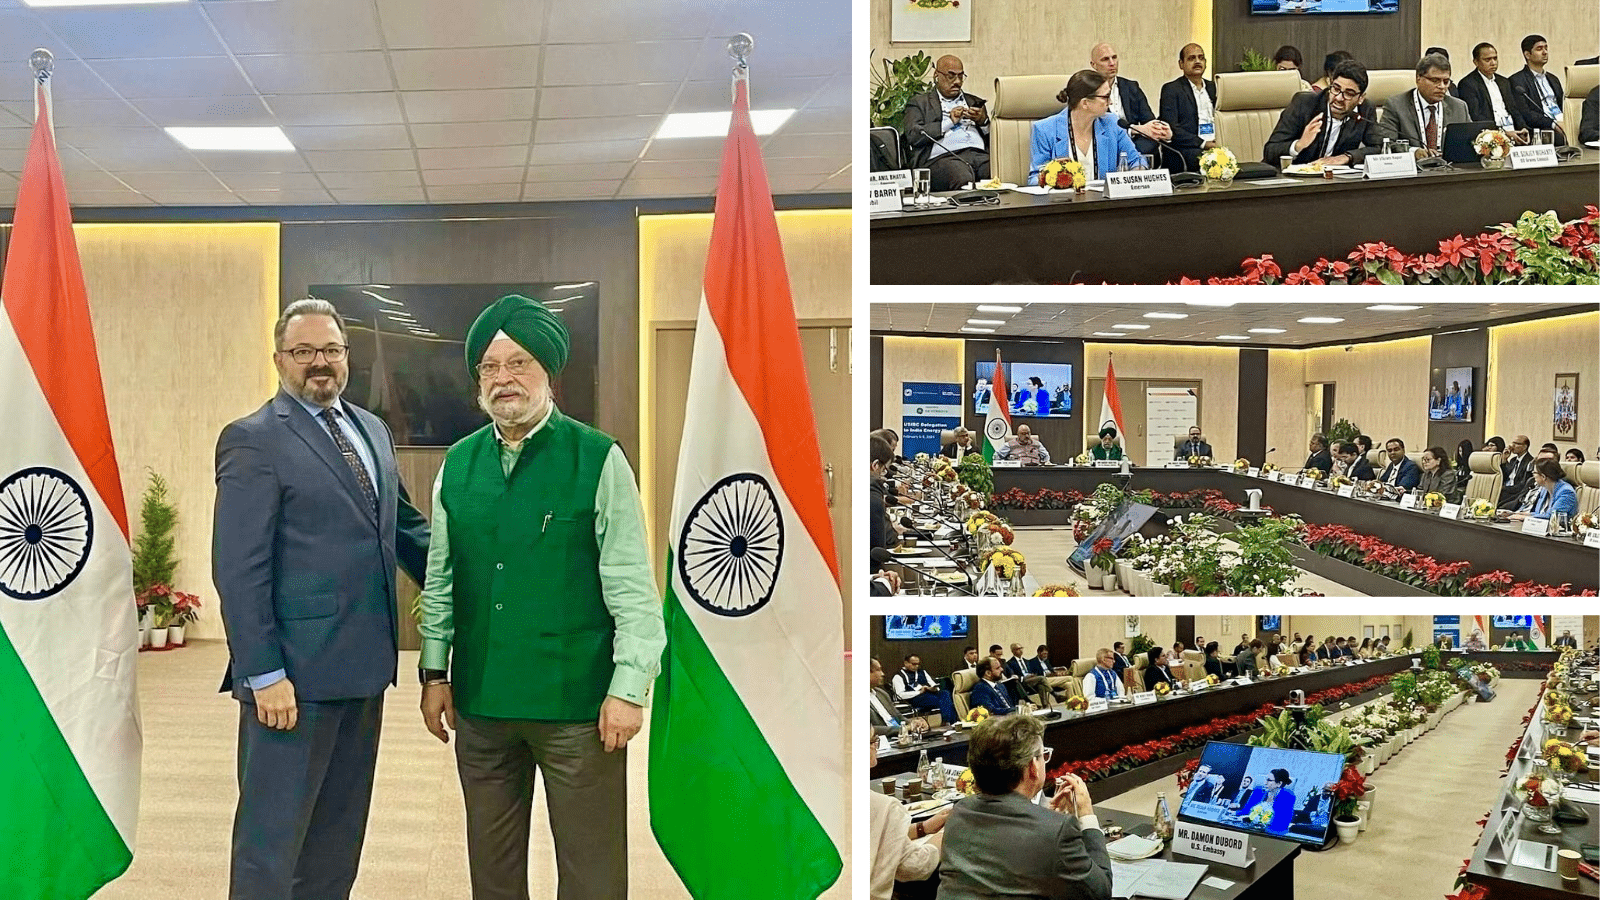 US-India Energy Transition Roundtable with the Minister of Petroleum and Natural Gas, Hardeep Singh Puri. Moderated by Nolty Theriot. Goa, India